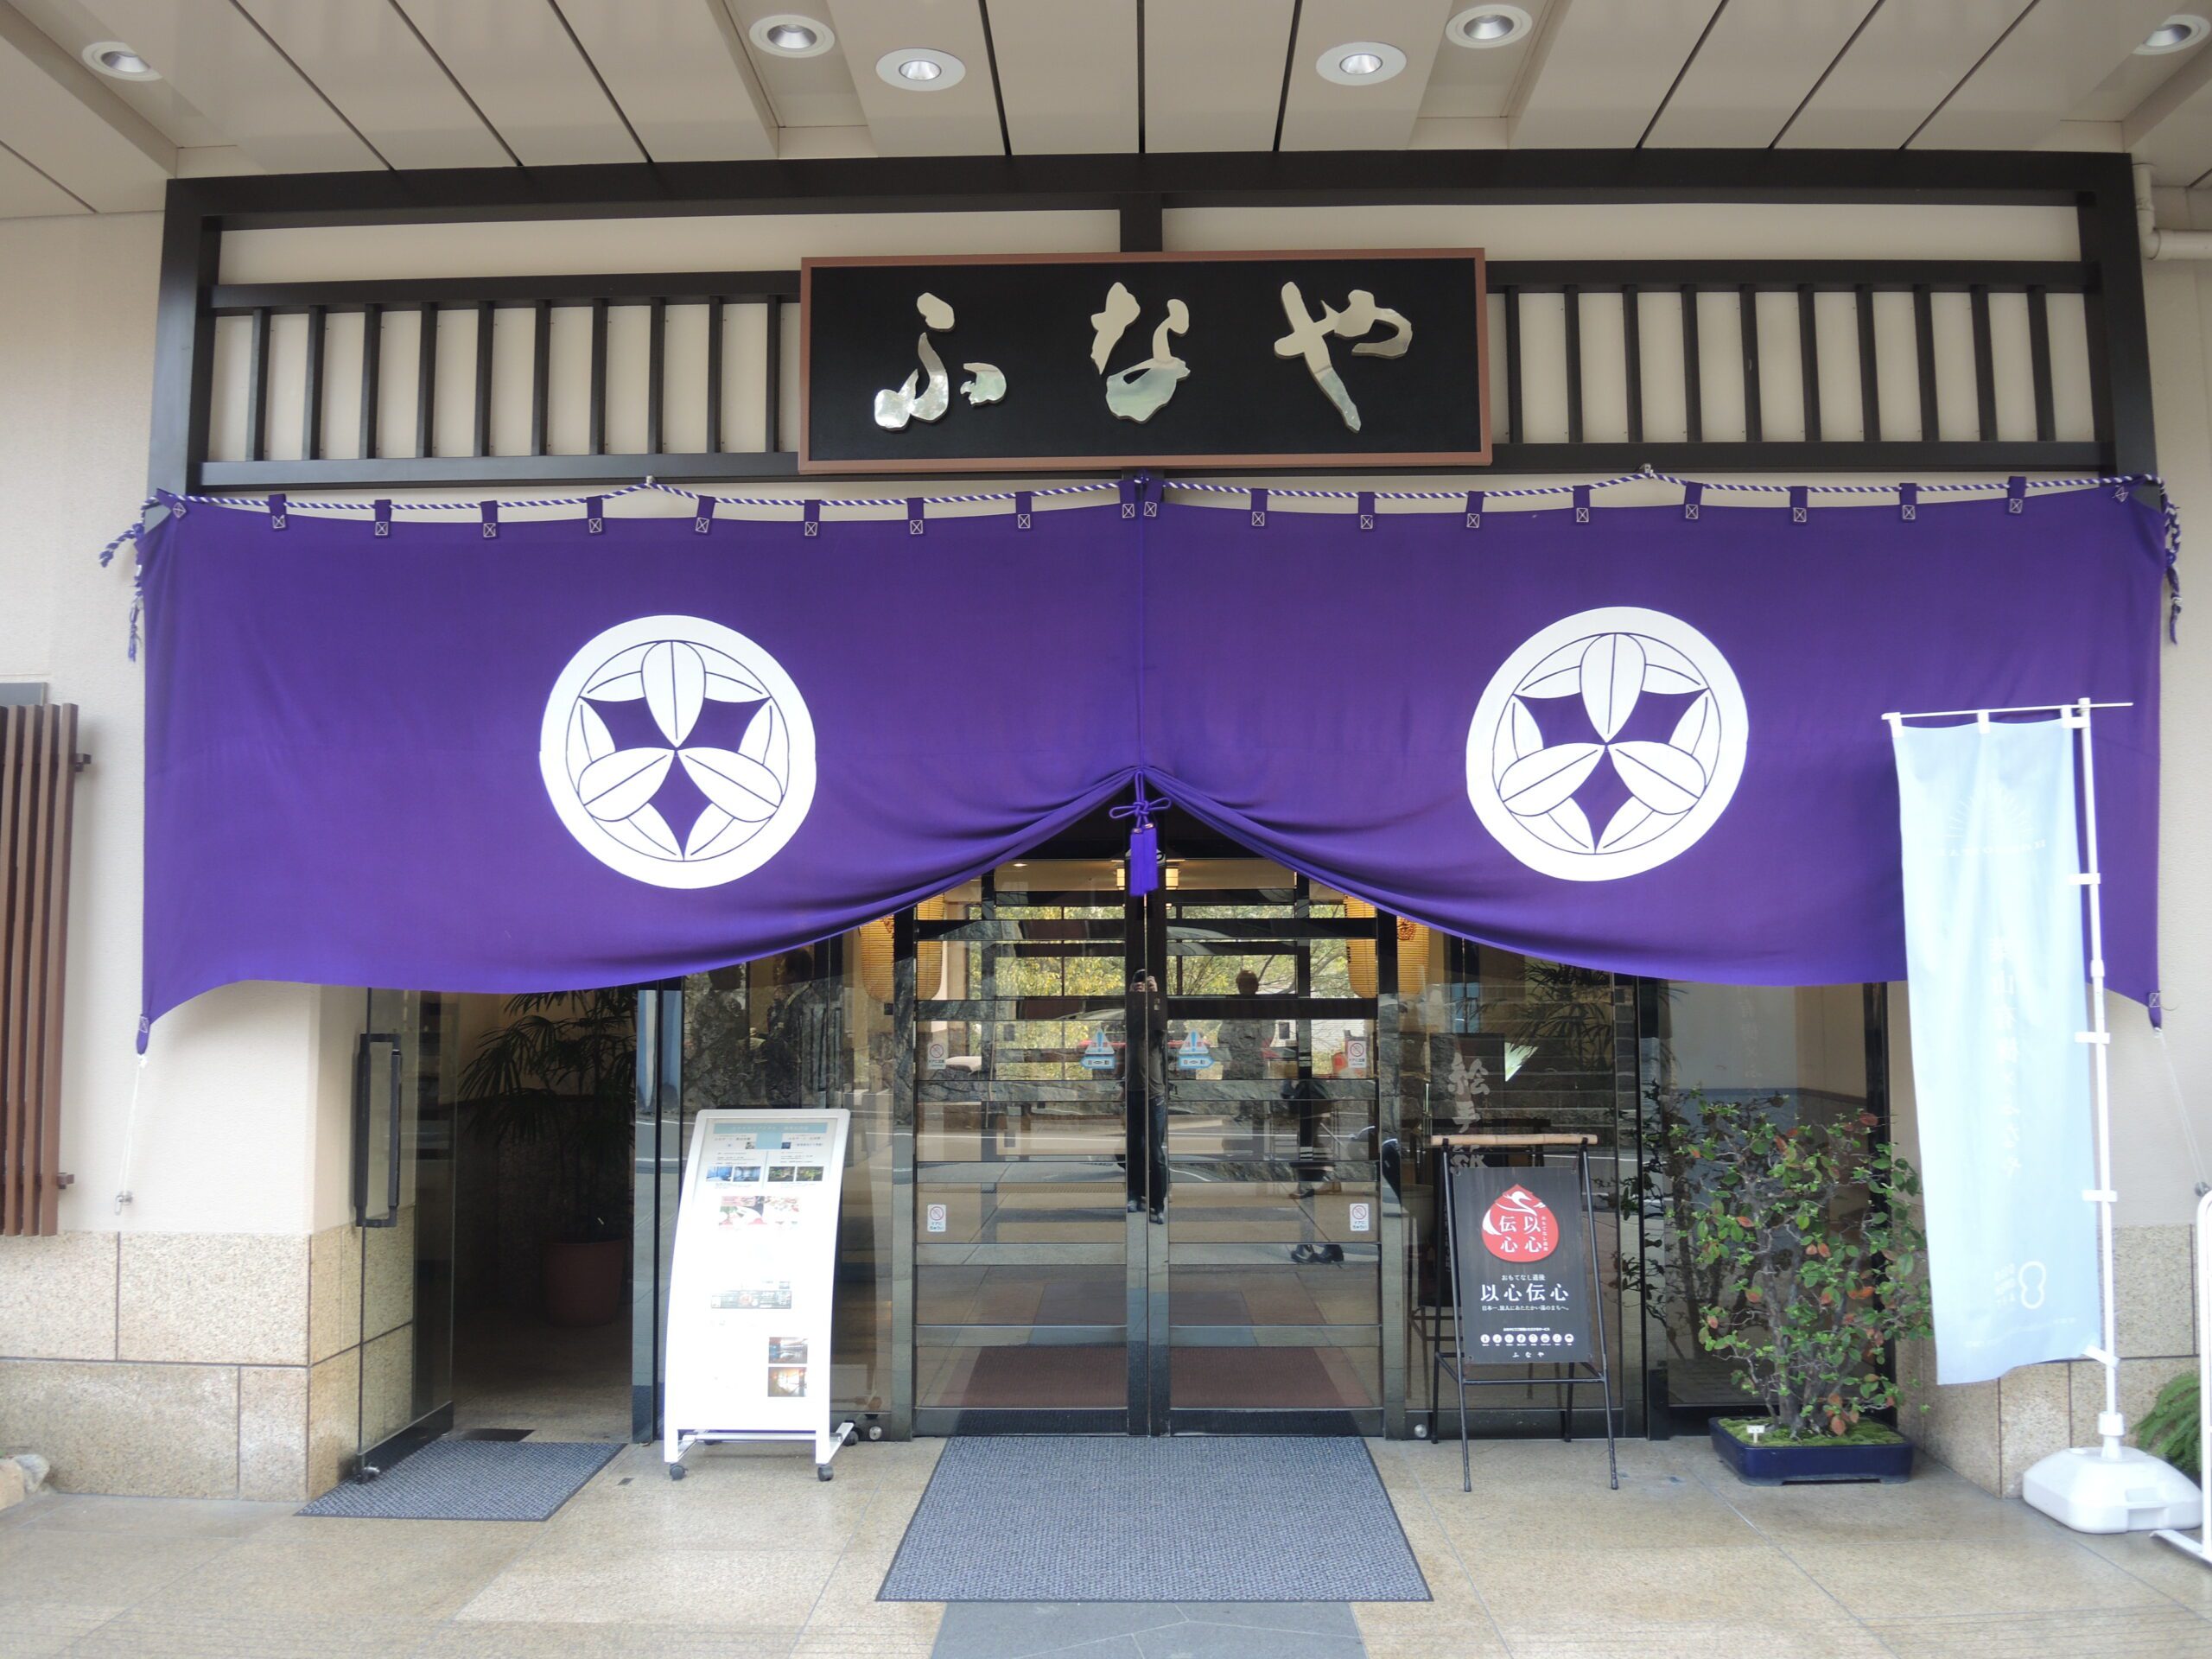 a purple banner with white circles on the front of a building